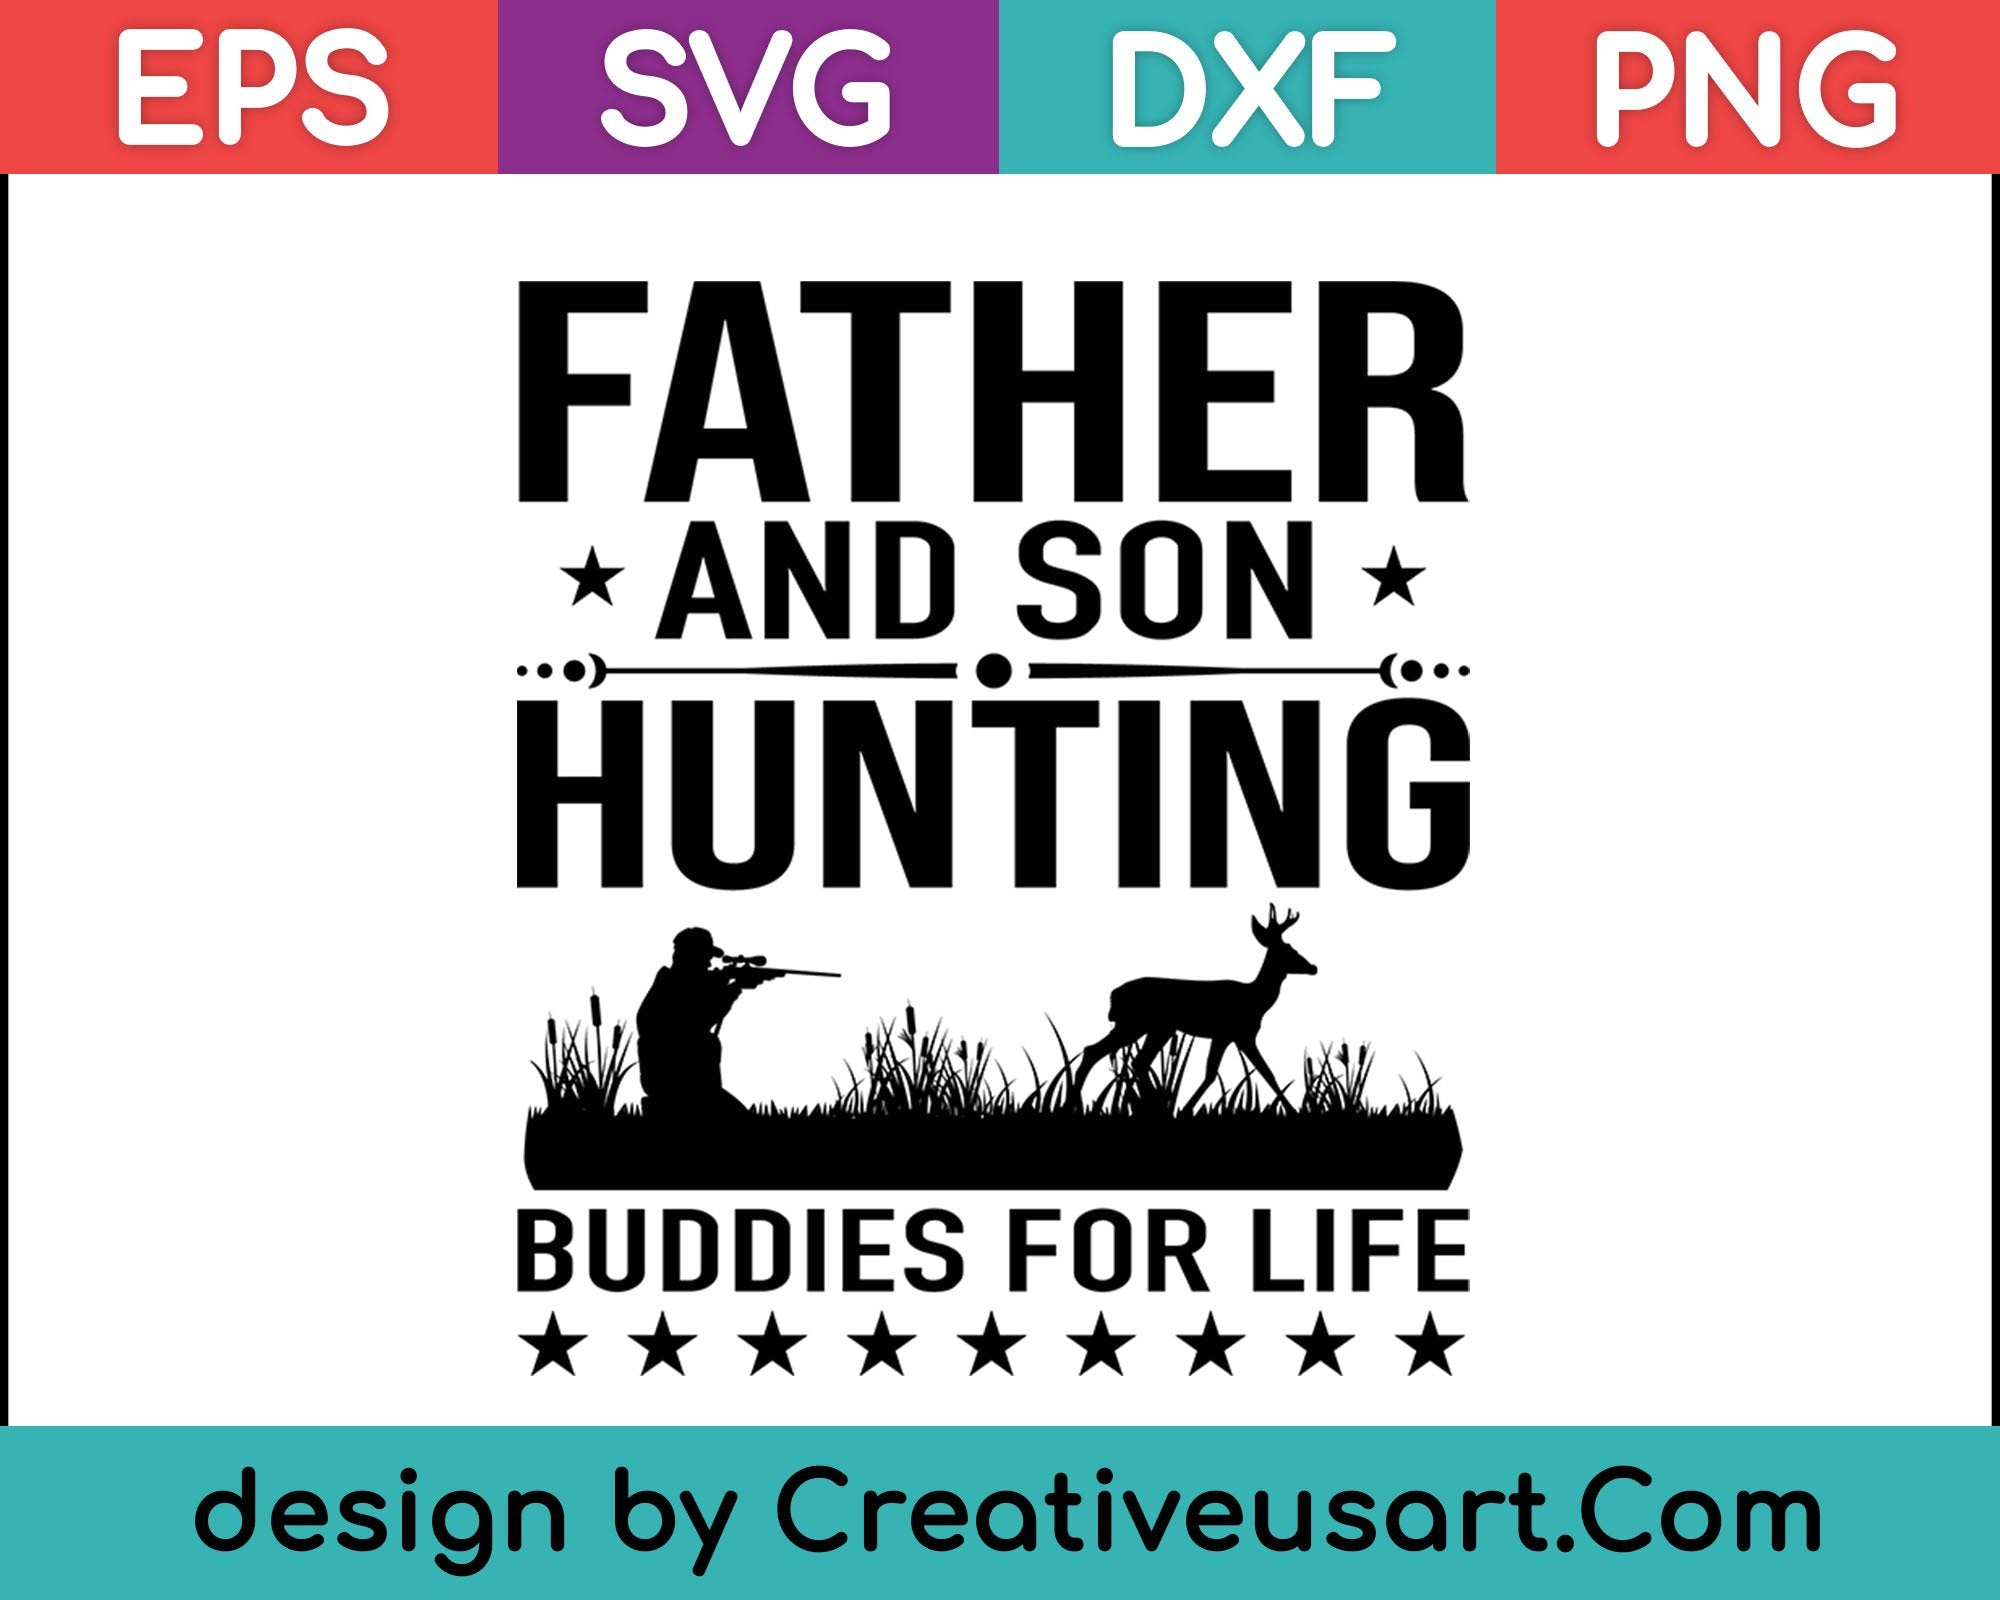 Download Father And Son Hunting Buddies For Life T Shirt Gift Svg Files Creativeusarts